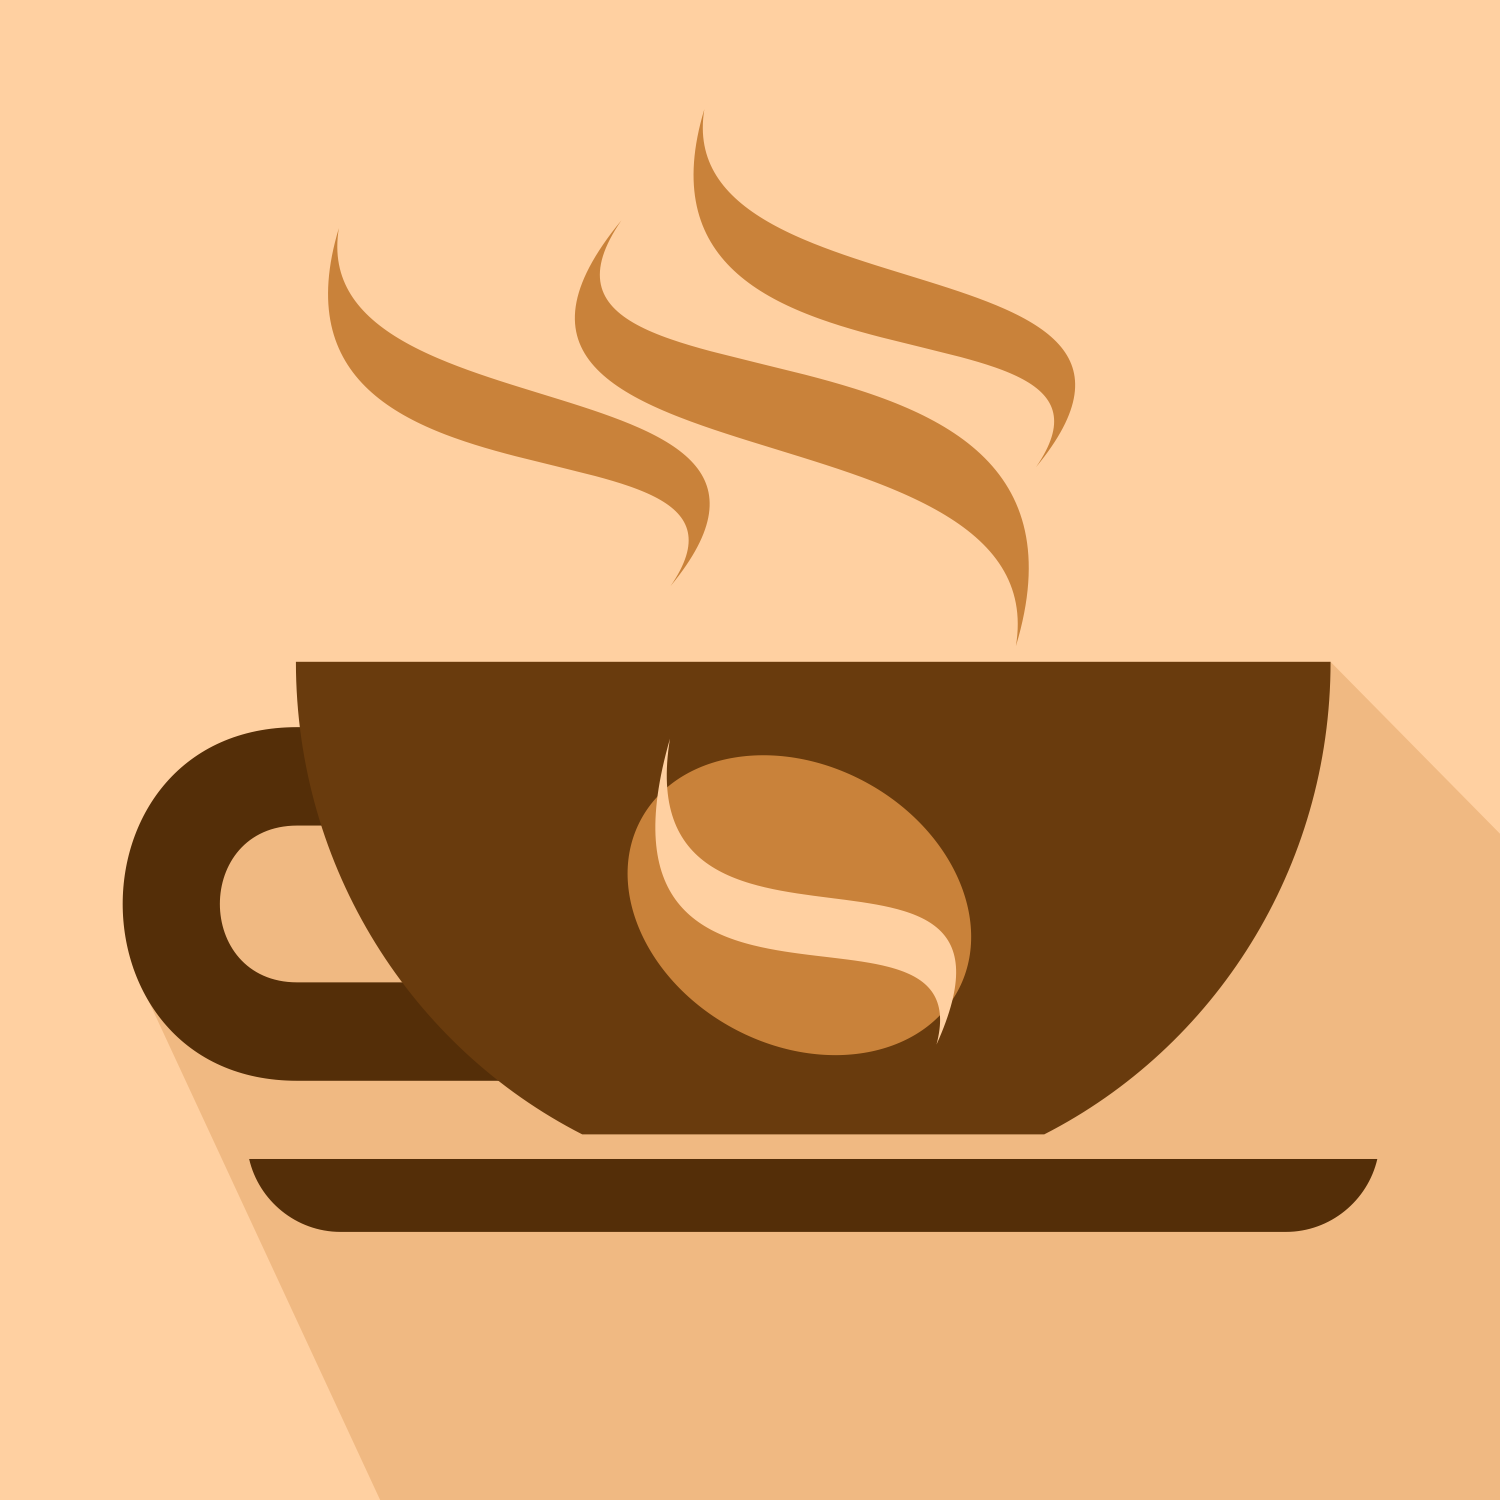 Download Vector for free use: Cup of coffee